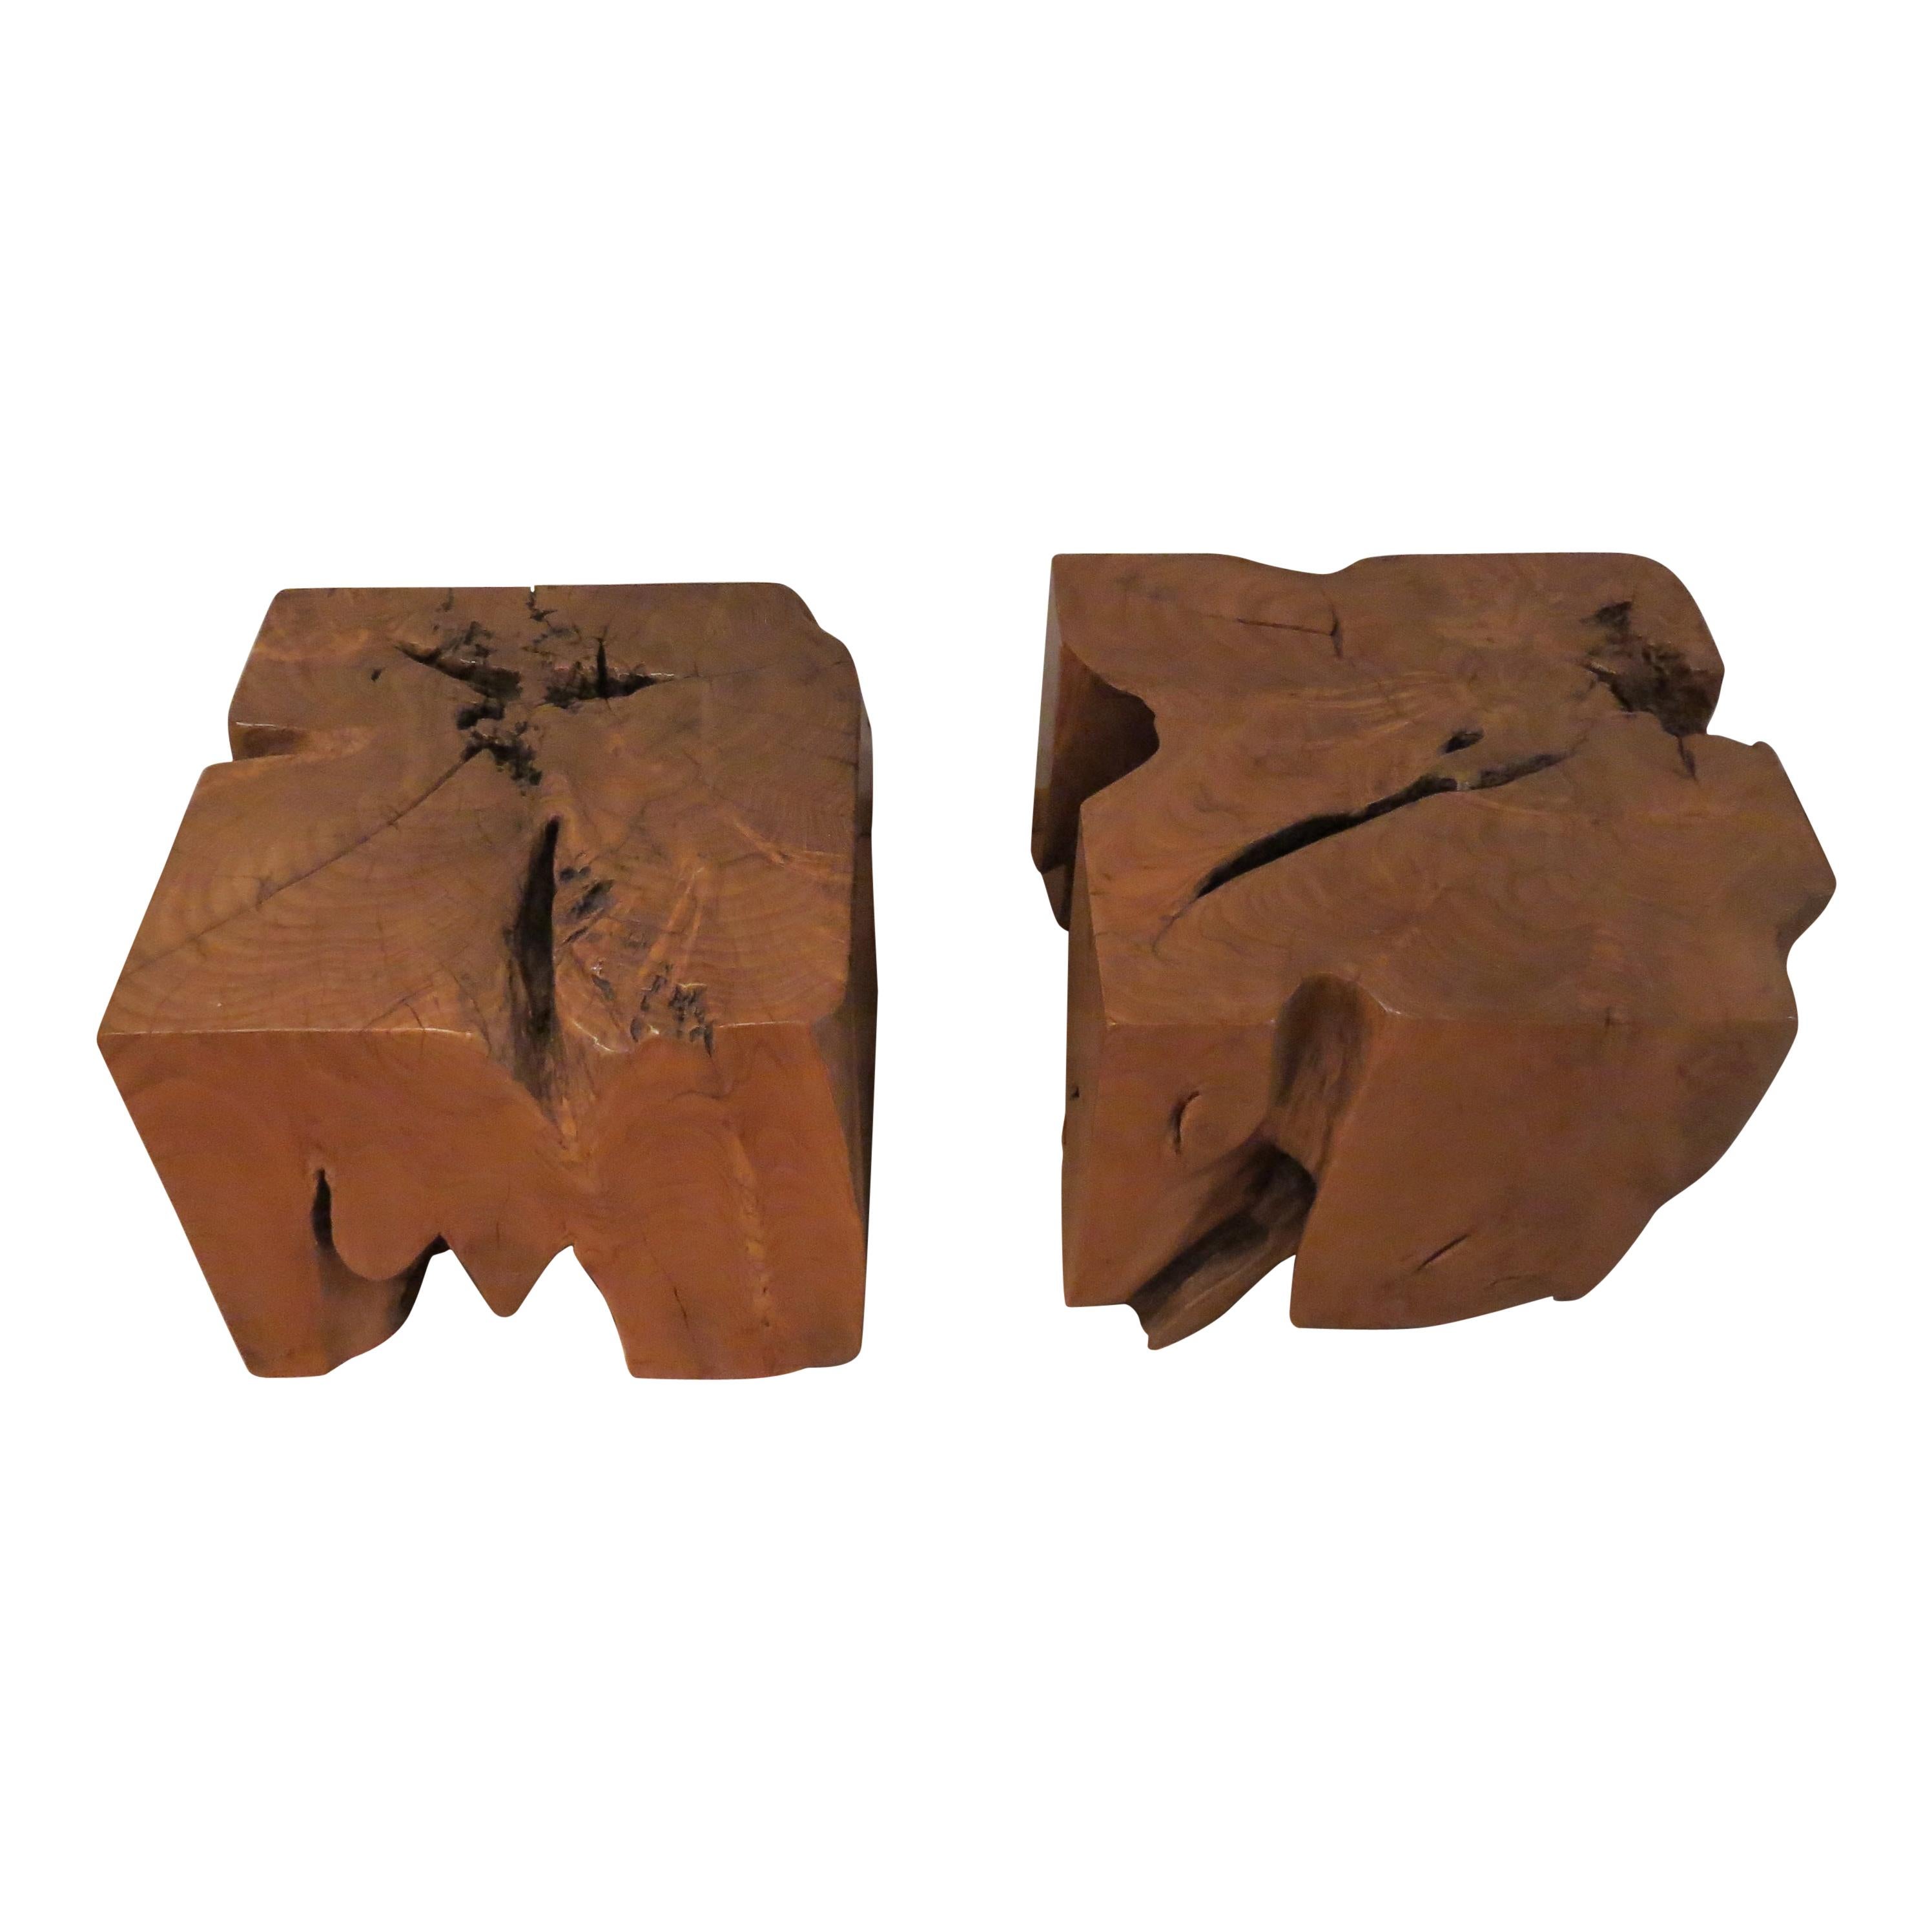 Pair of organic naturalistic chunky root teak cube side tables nightstands.

Very good quality, heavy tables made from solid Teak. Beautiful grain and texture. 

Organic form, the tables vary slightly in size due to their naturalistic form.